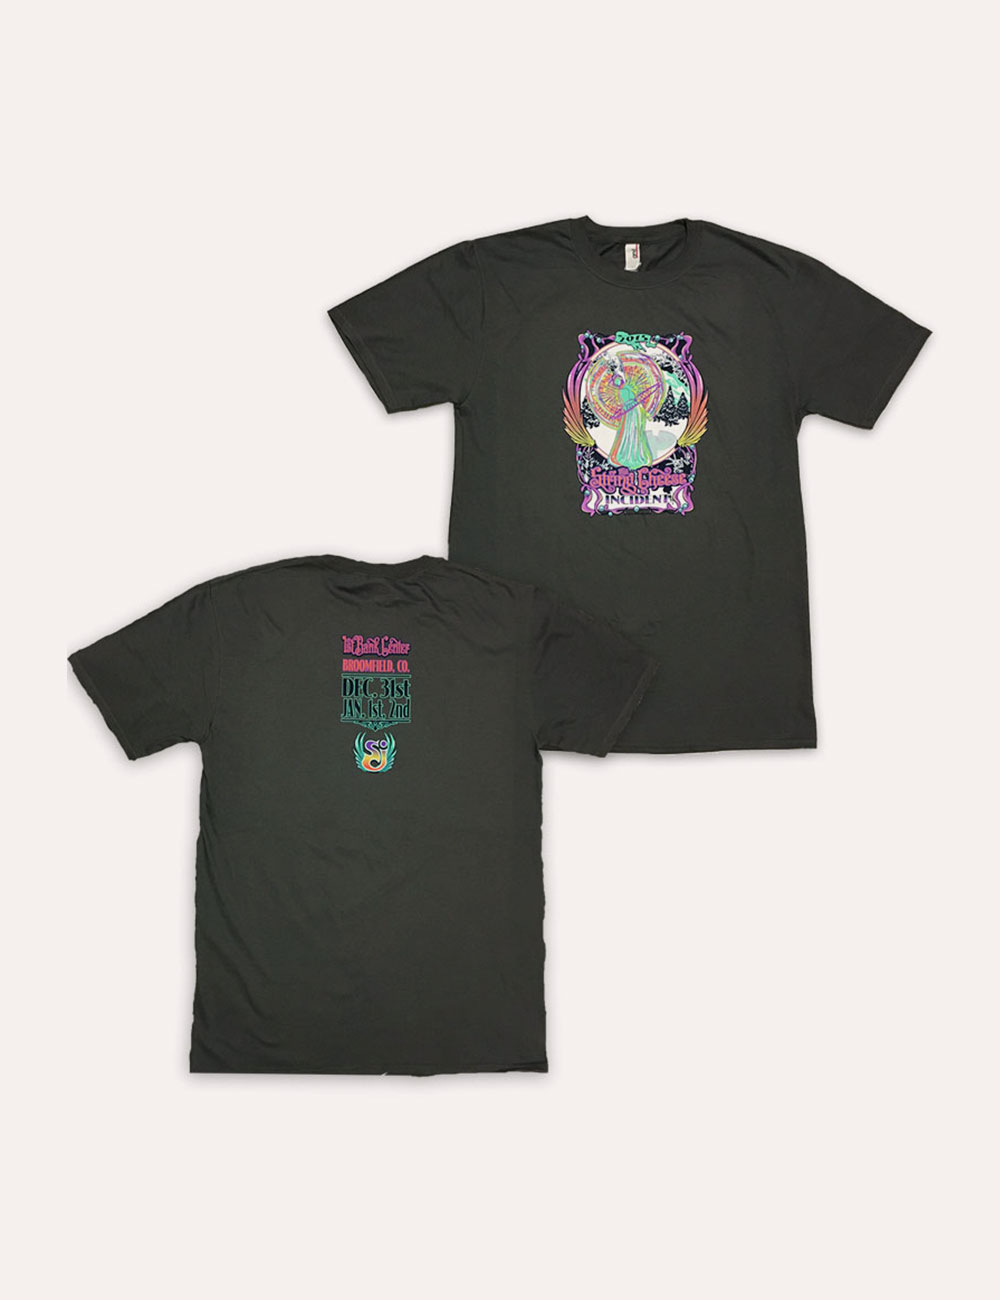 The String Cheese Incident - Merch - T-Shirts - 2015 New Years Tee